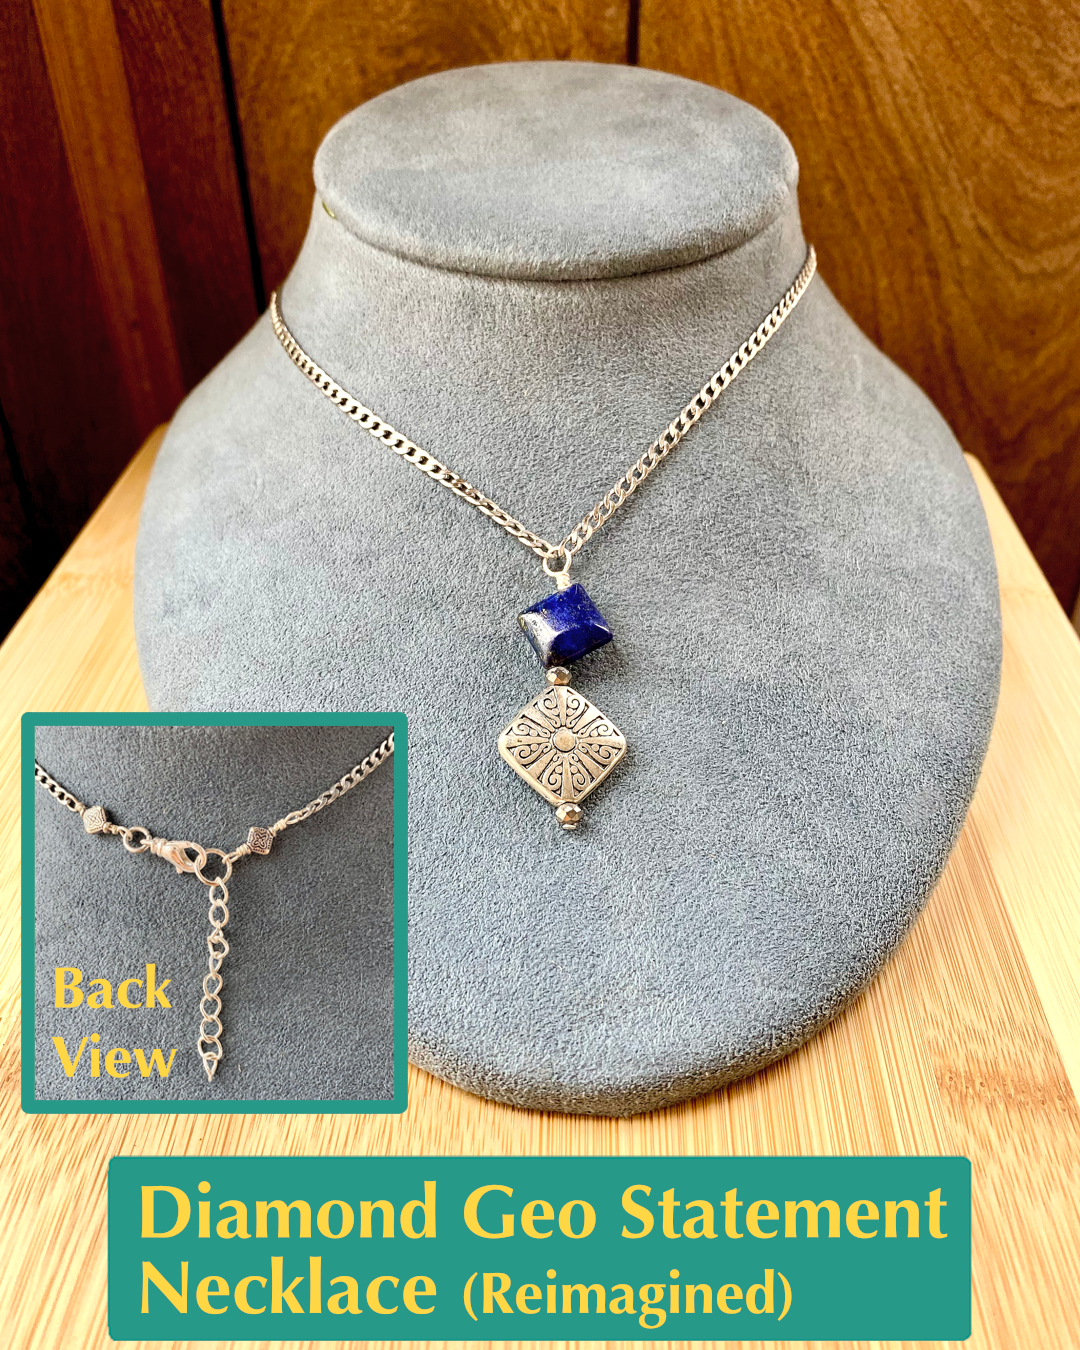 Diamond Geo Statement Necklace (Classic and Reimagined)